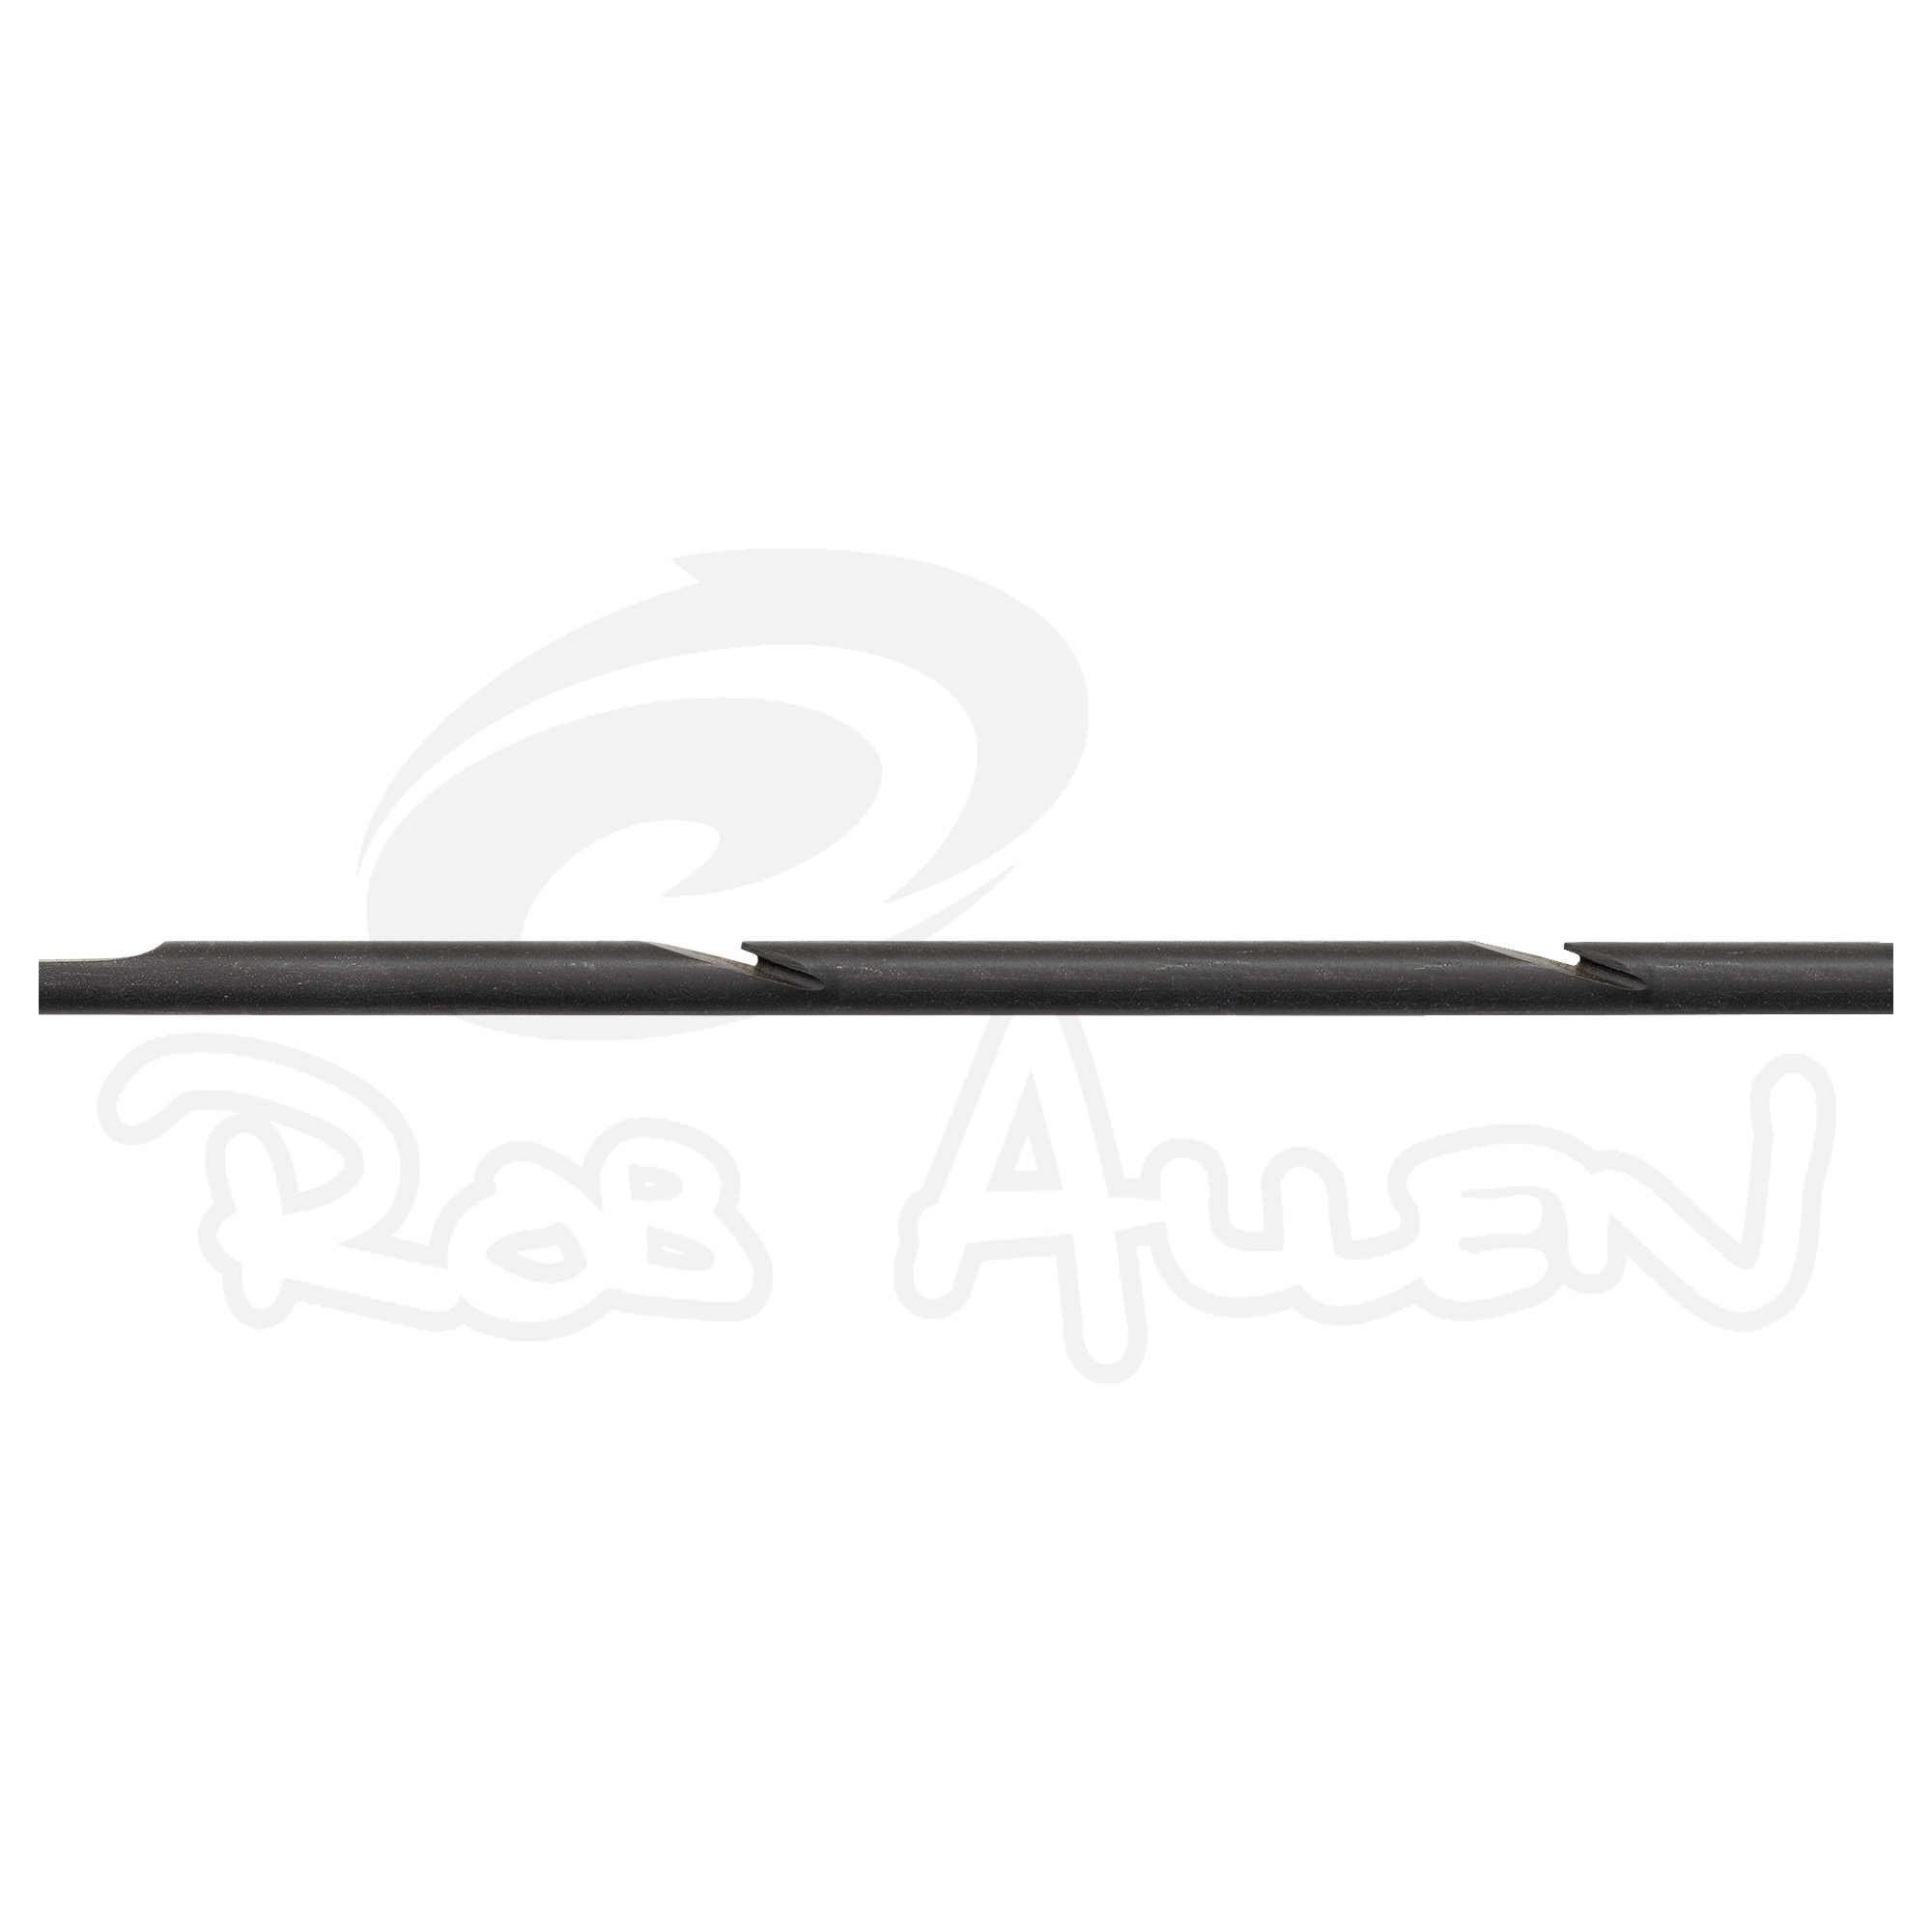 Rob Allen Spear 7.5mm Double Notched | Diving Sports Canada | Vancouver